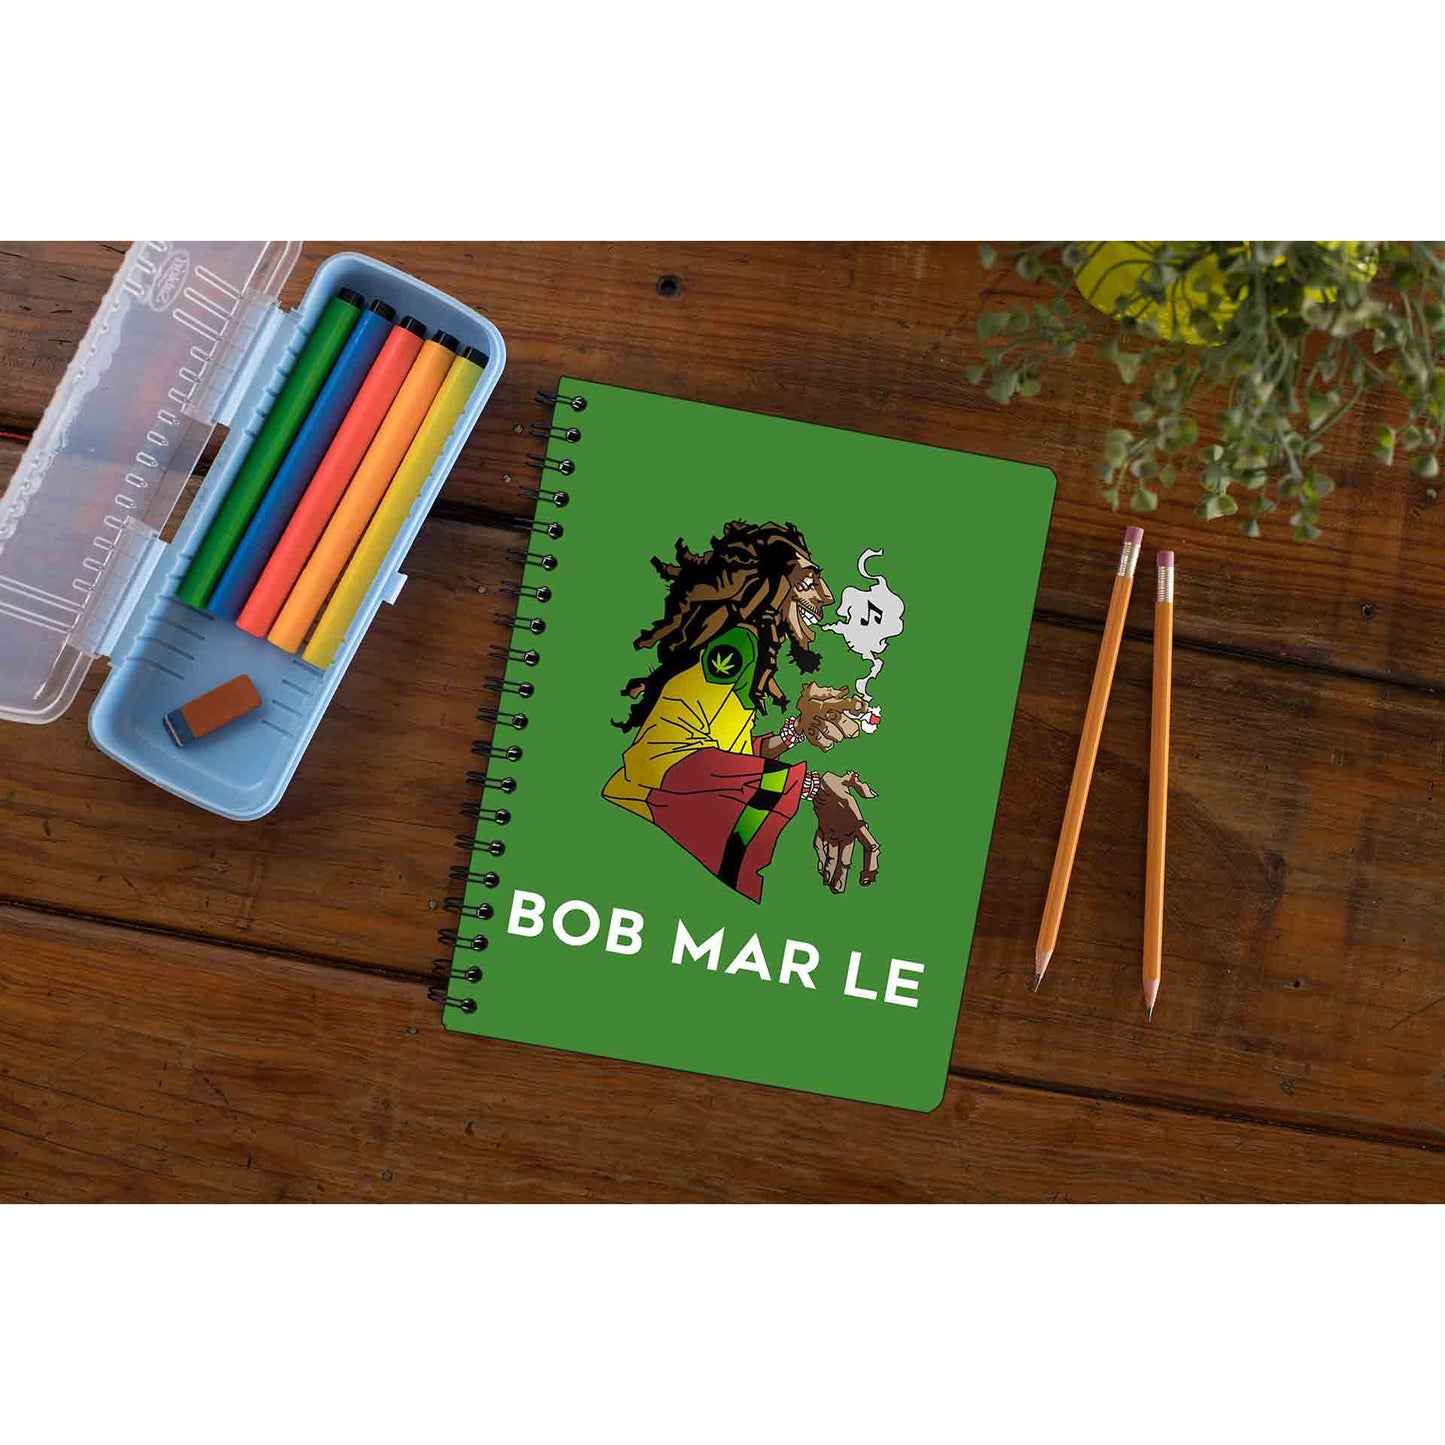 bob marley mar le notebook notepad diary buy online india the banyan tee tbt unruled